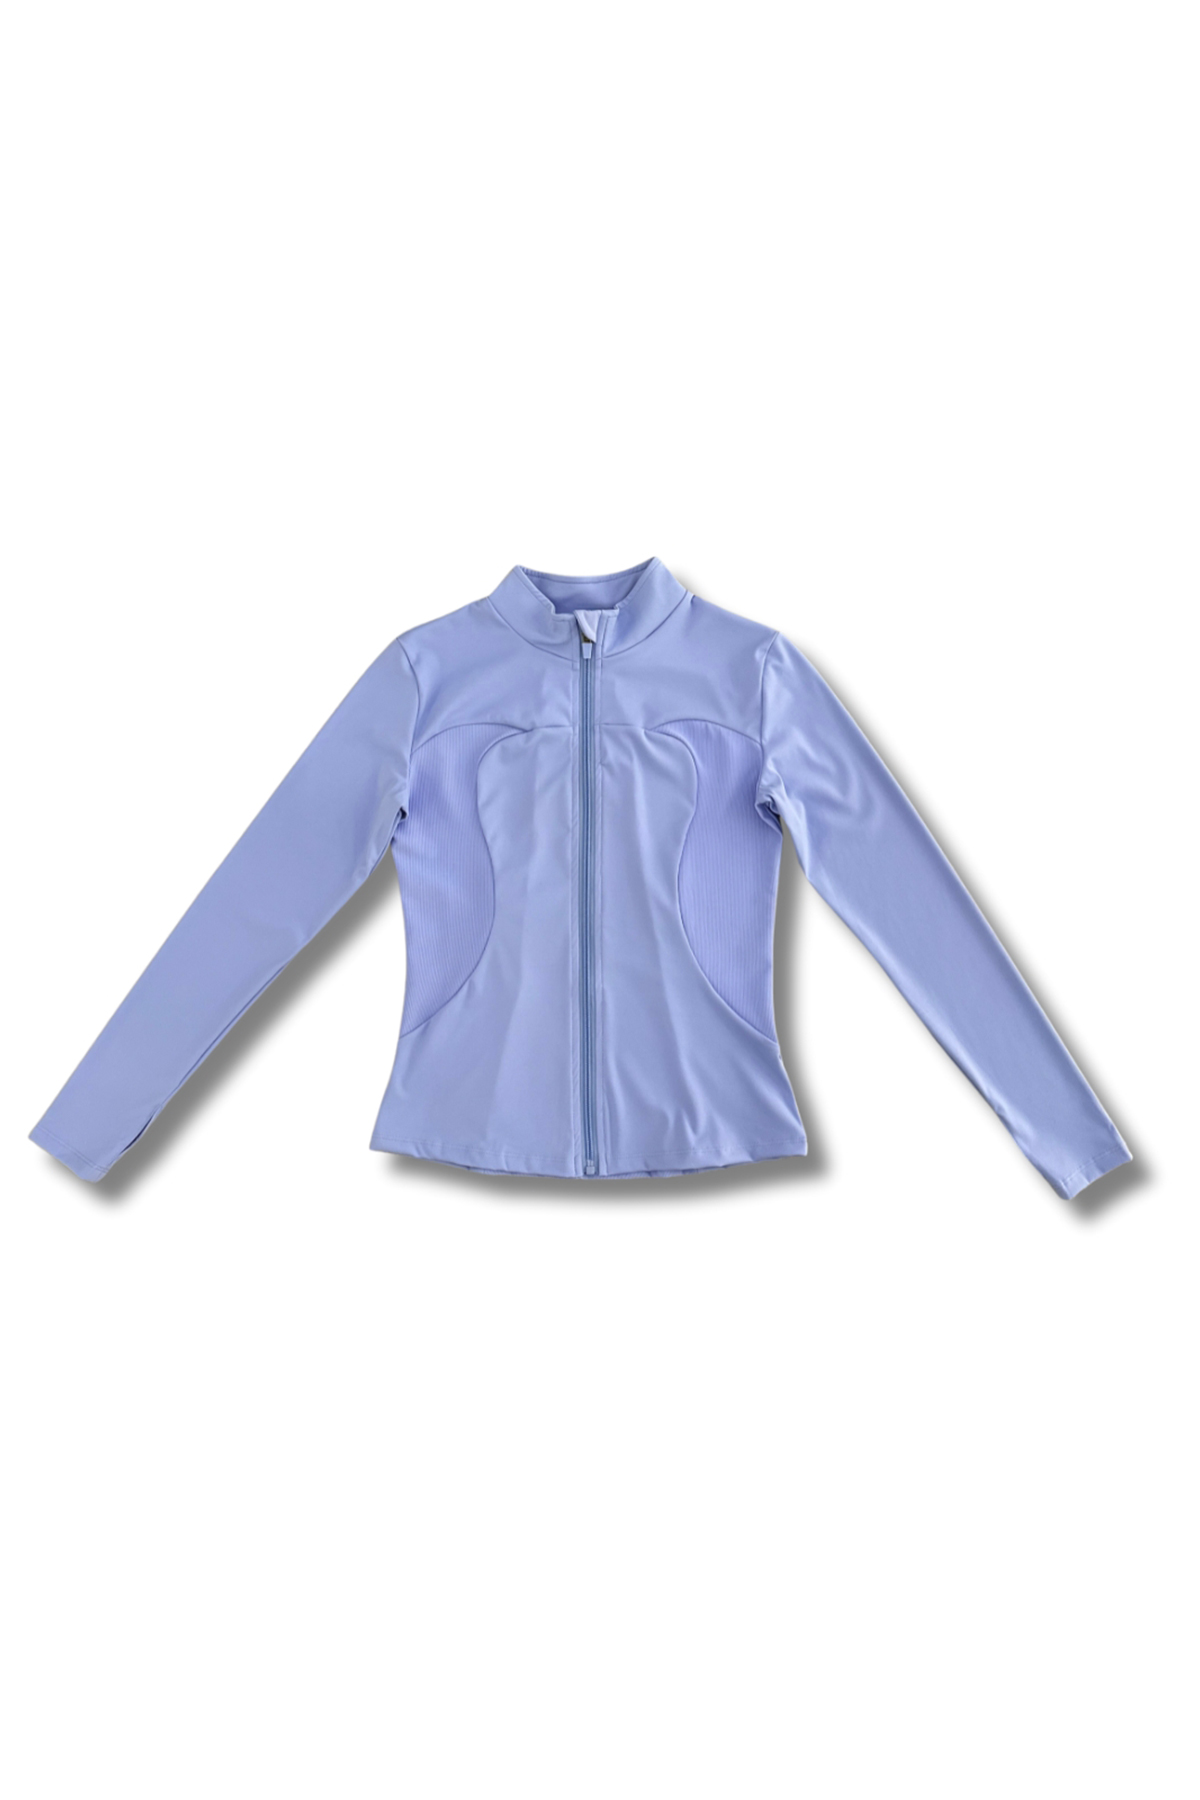 Don’t-Quit-Running-Jacket-for-Women-peach-fron